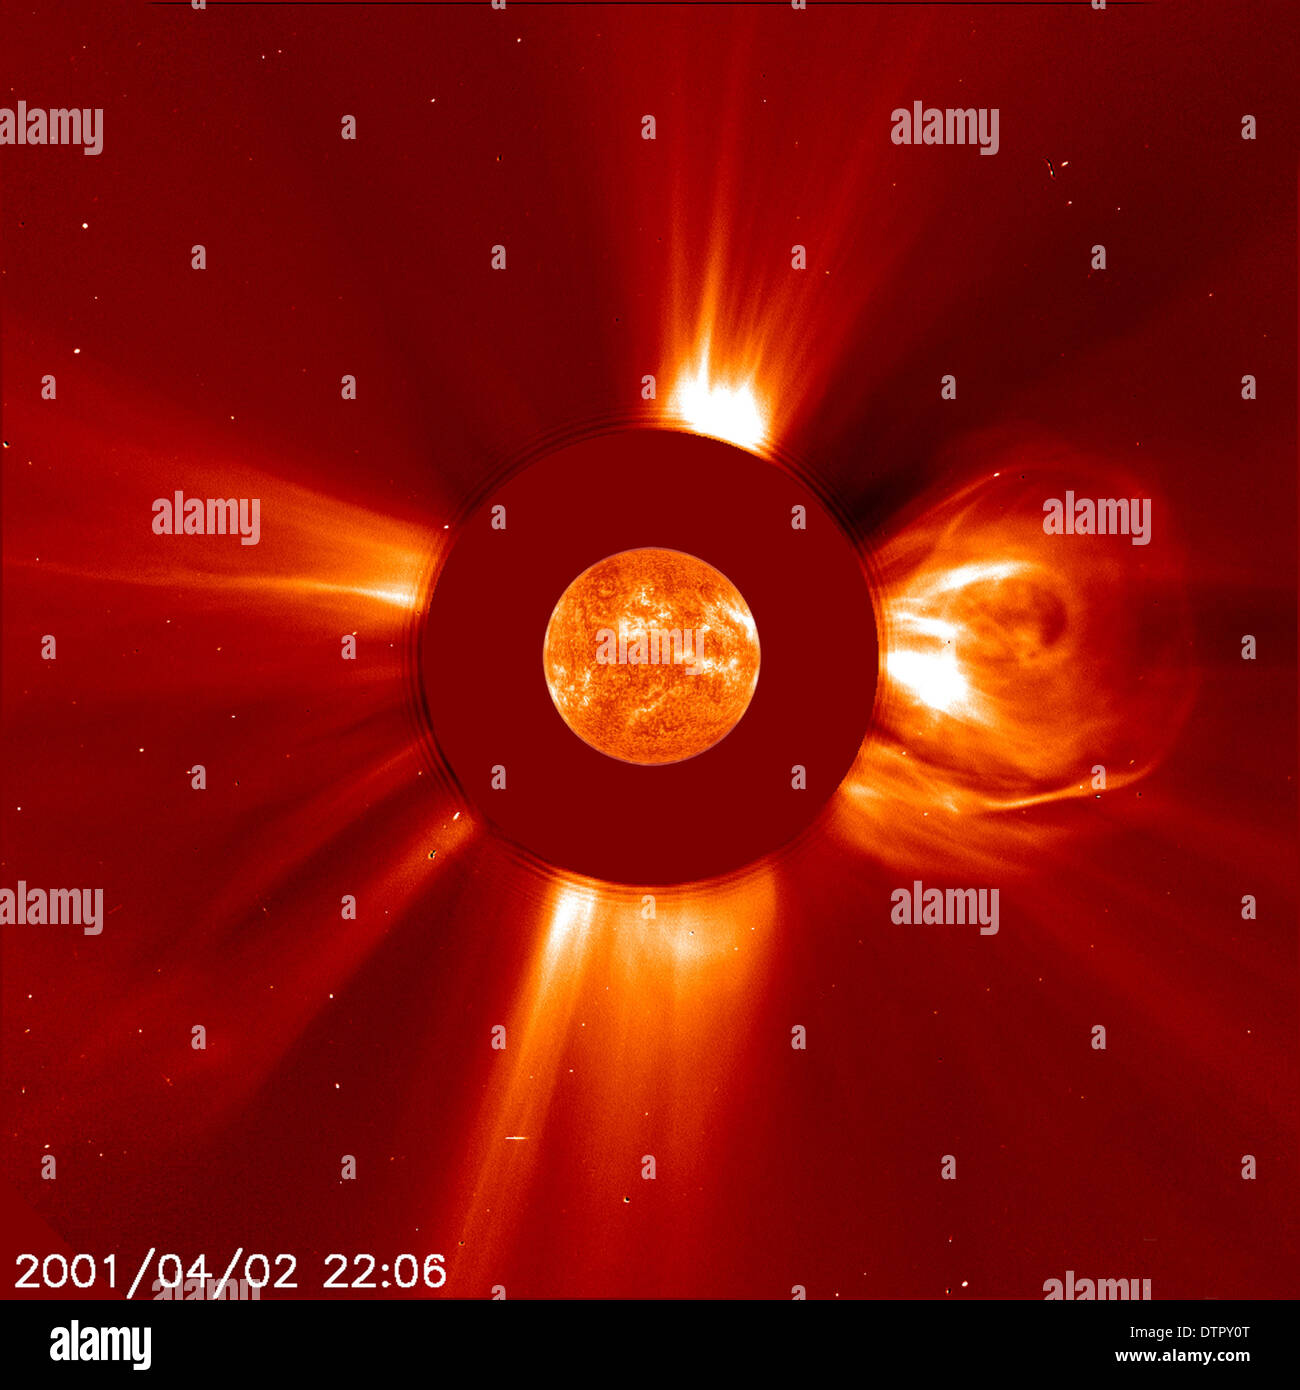 The sun unleashed the biggest solar flare ever recorded, as observed by